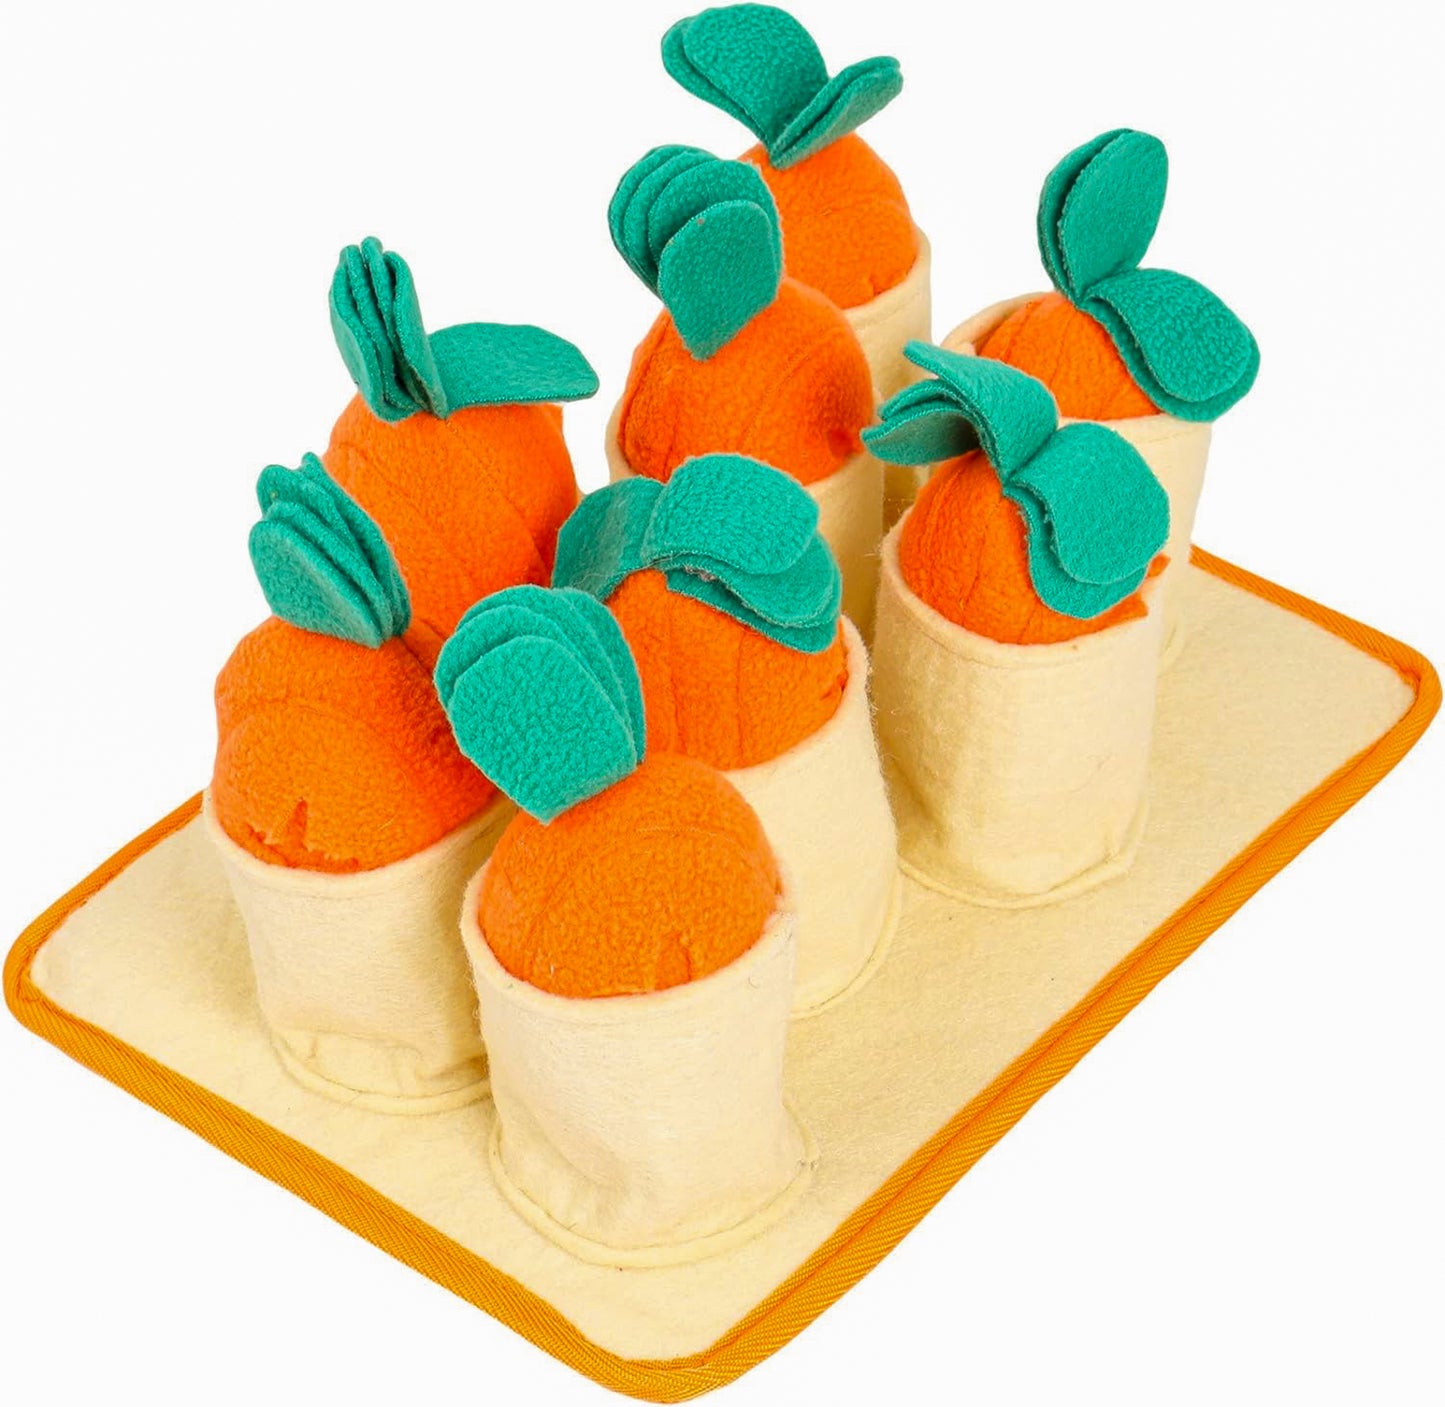 a beige snuffle mat toy for dogs featuring 8 soft cups, each containing an orange carrot soft toy with green top